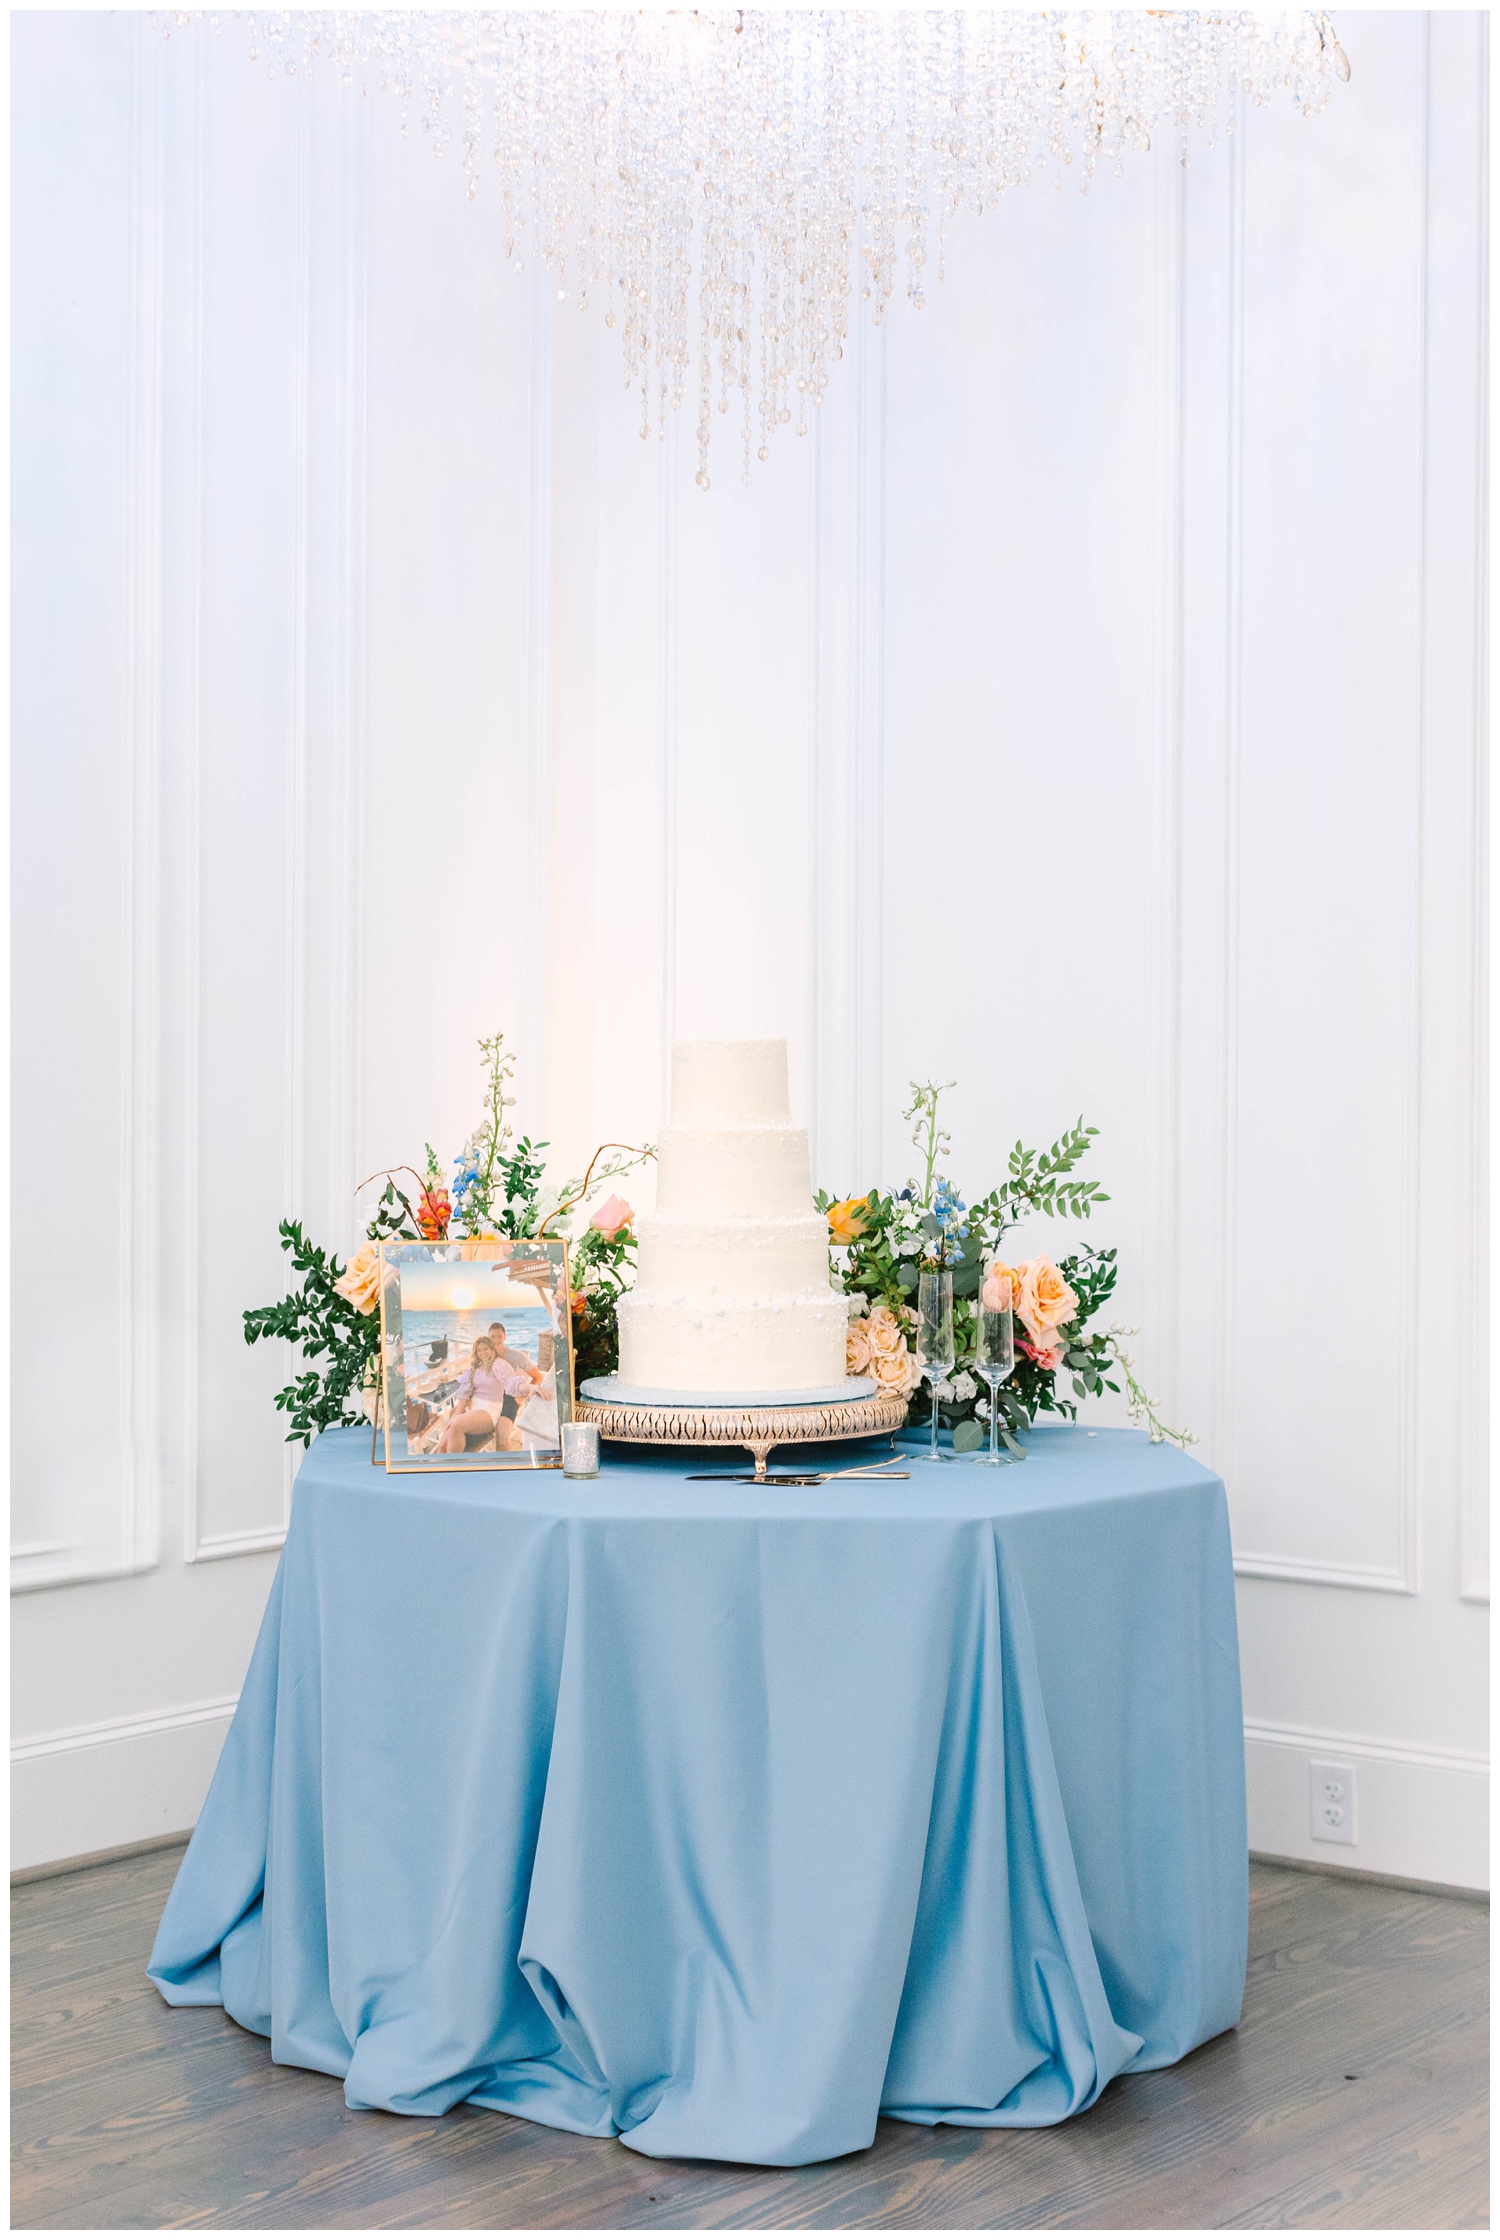 white tiered cake on blue tablecloth